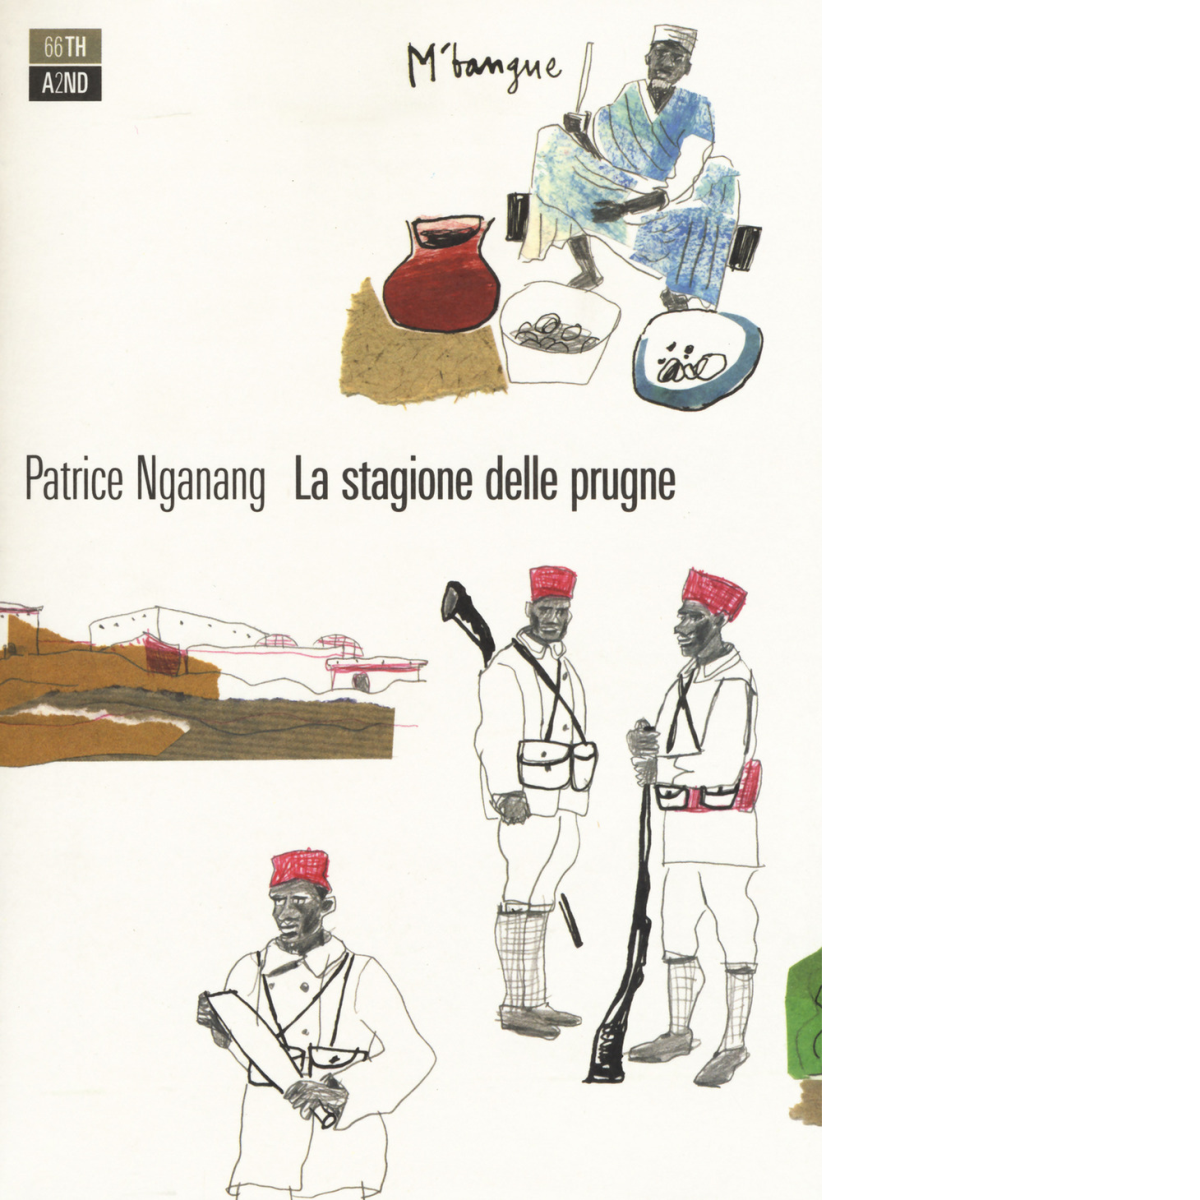 La stagione delle prugne di Patrice Nganang,  2018,  66th And 2nd